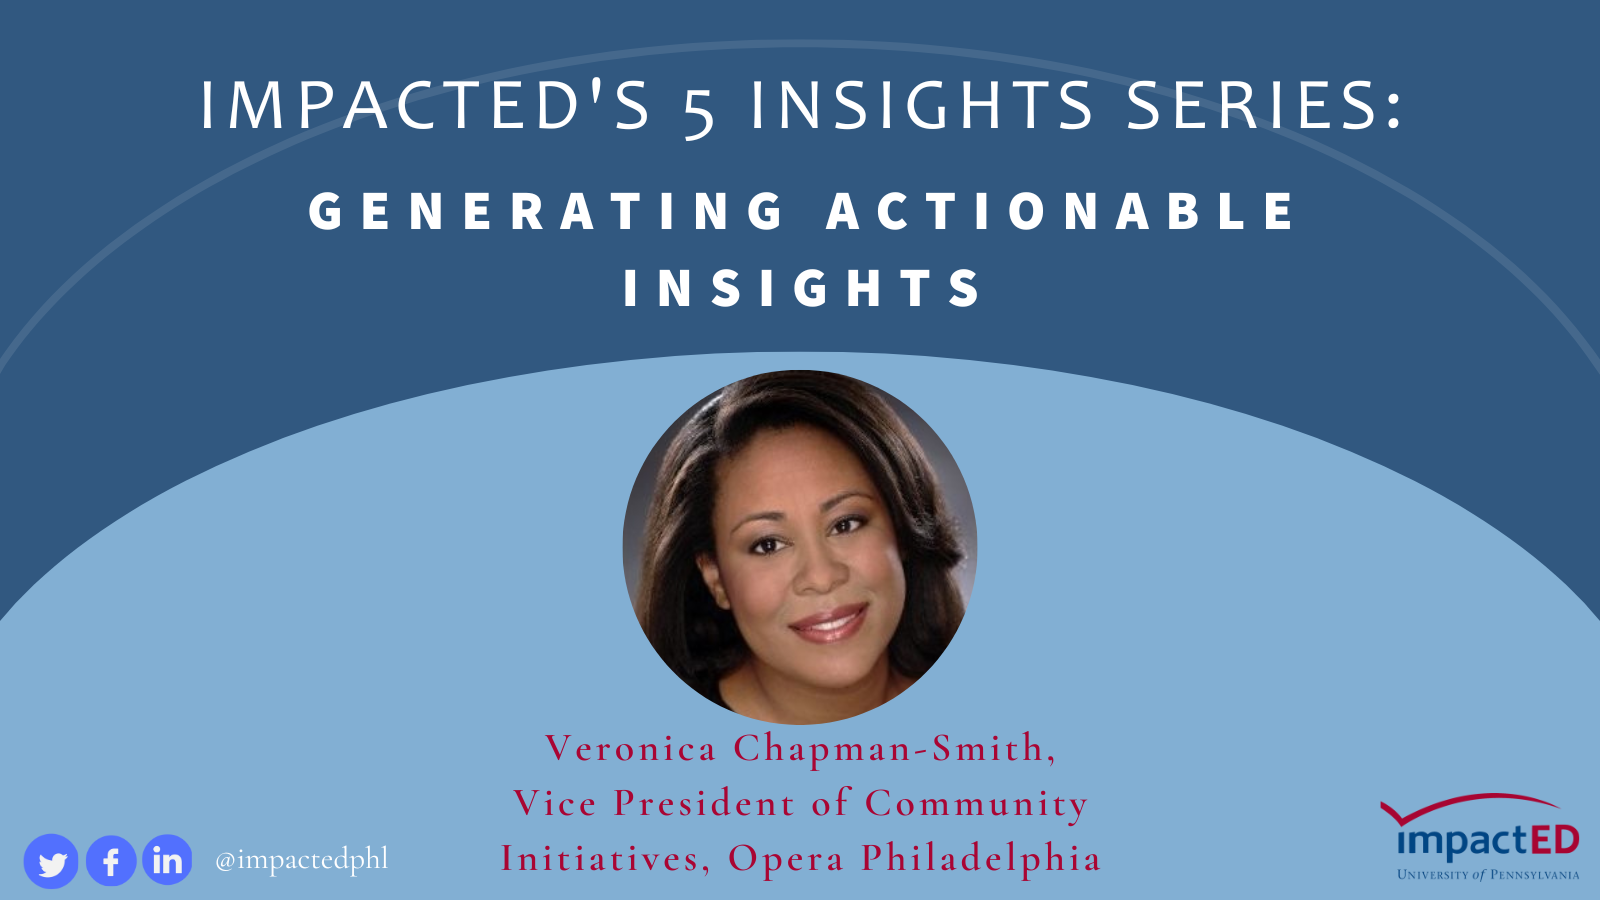 Generating Actionable Insights, Veronica Chapman-Smith